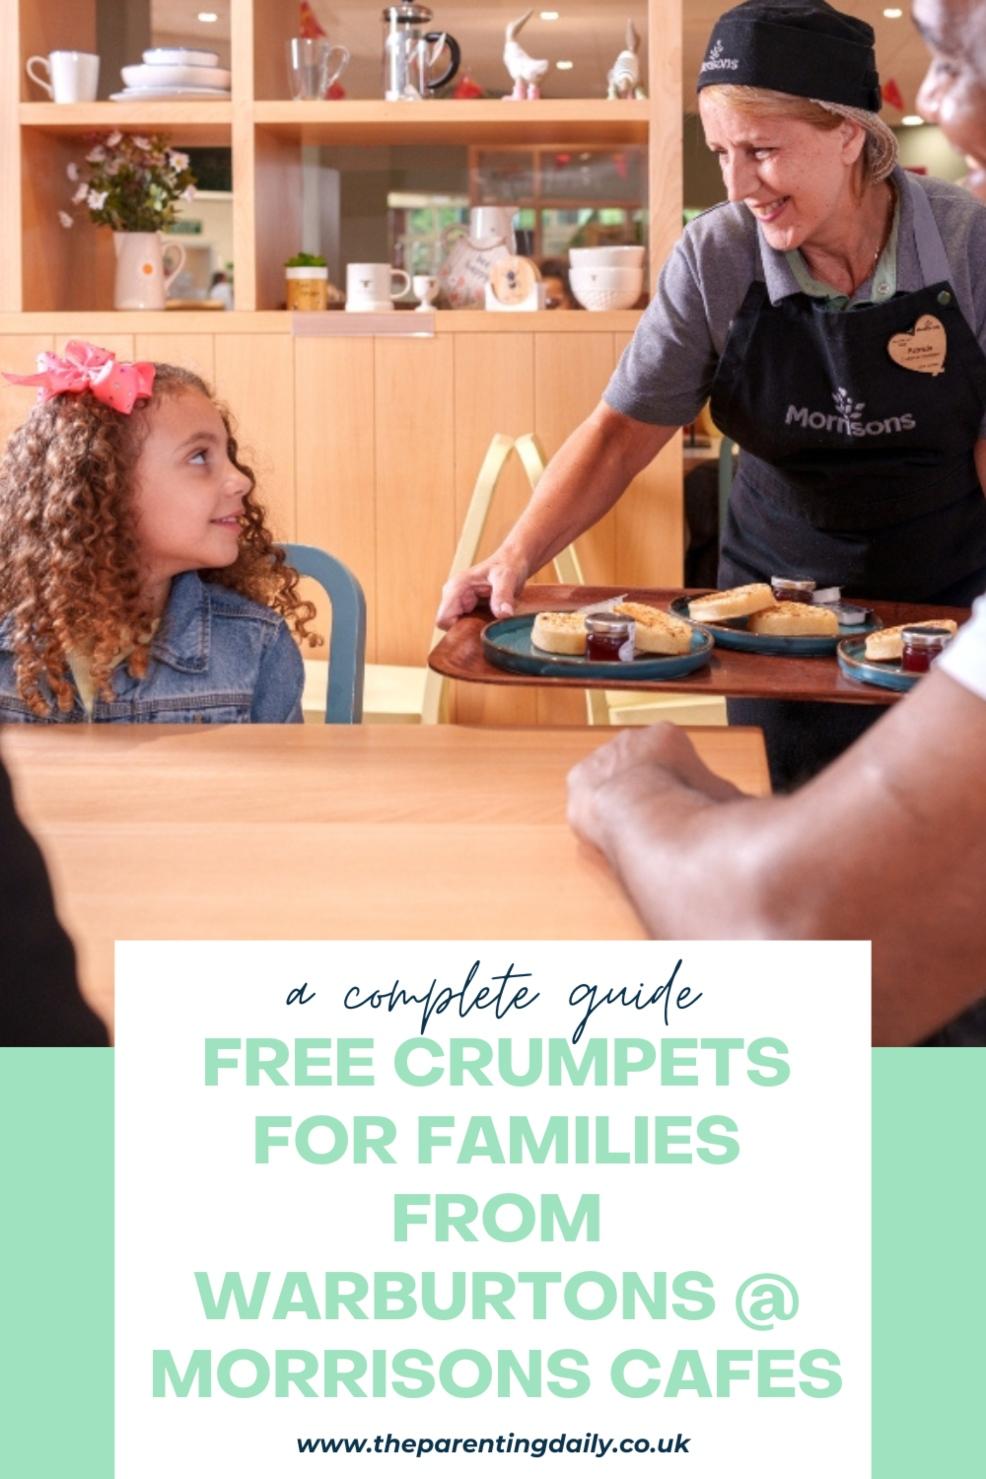 picture of Free Crumpets for families from Warburtons @ Morrisons Cafes